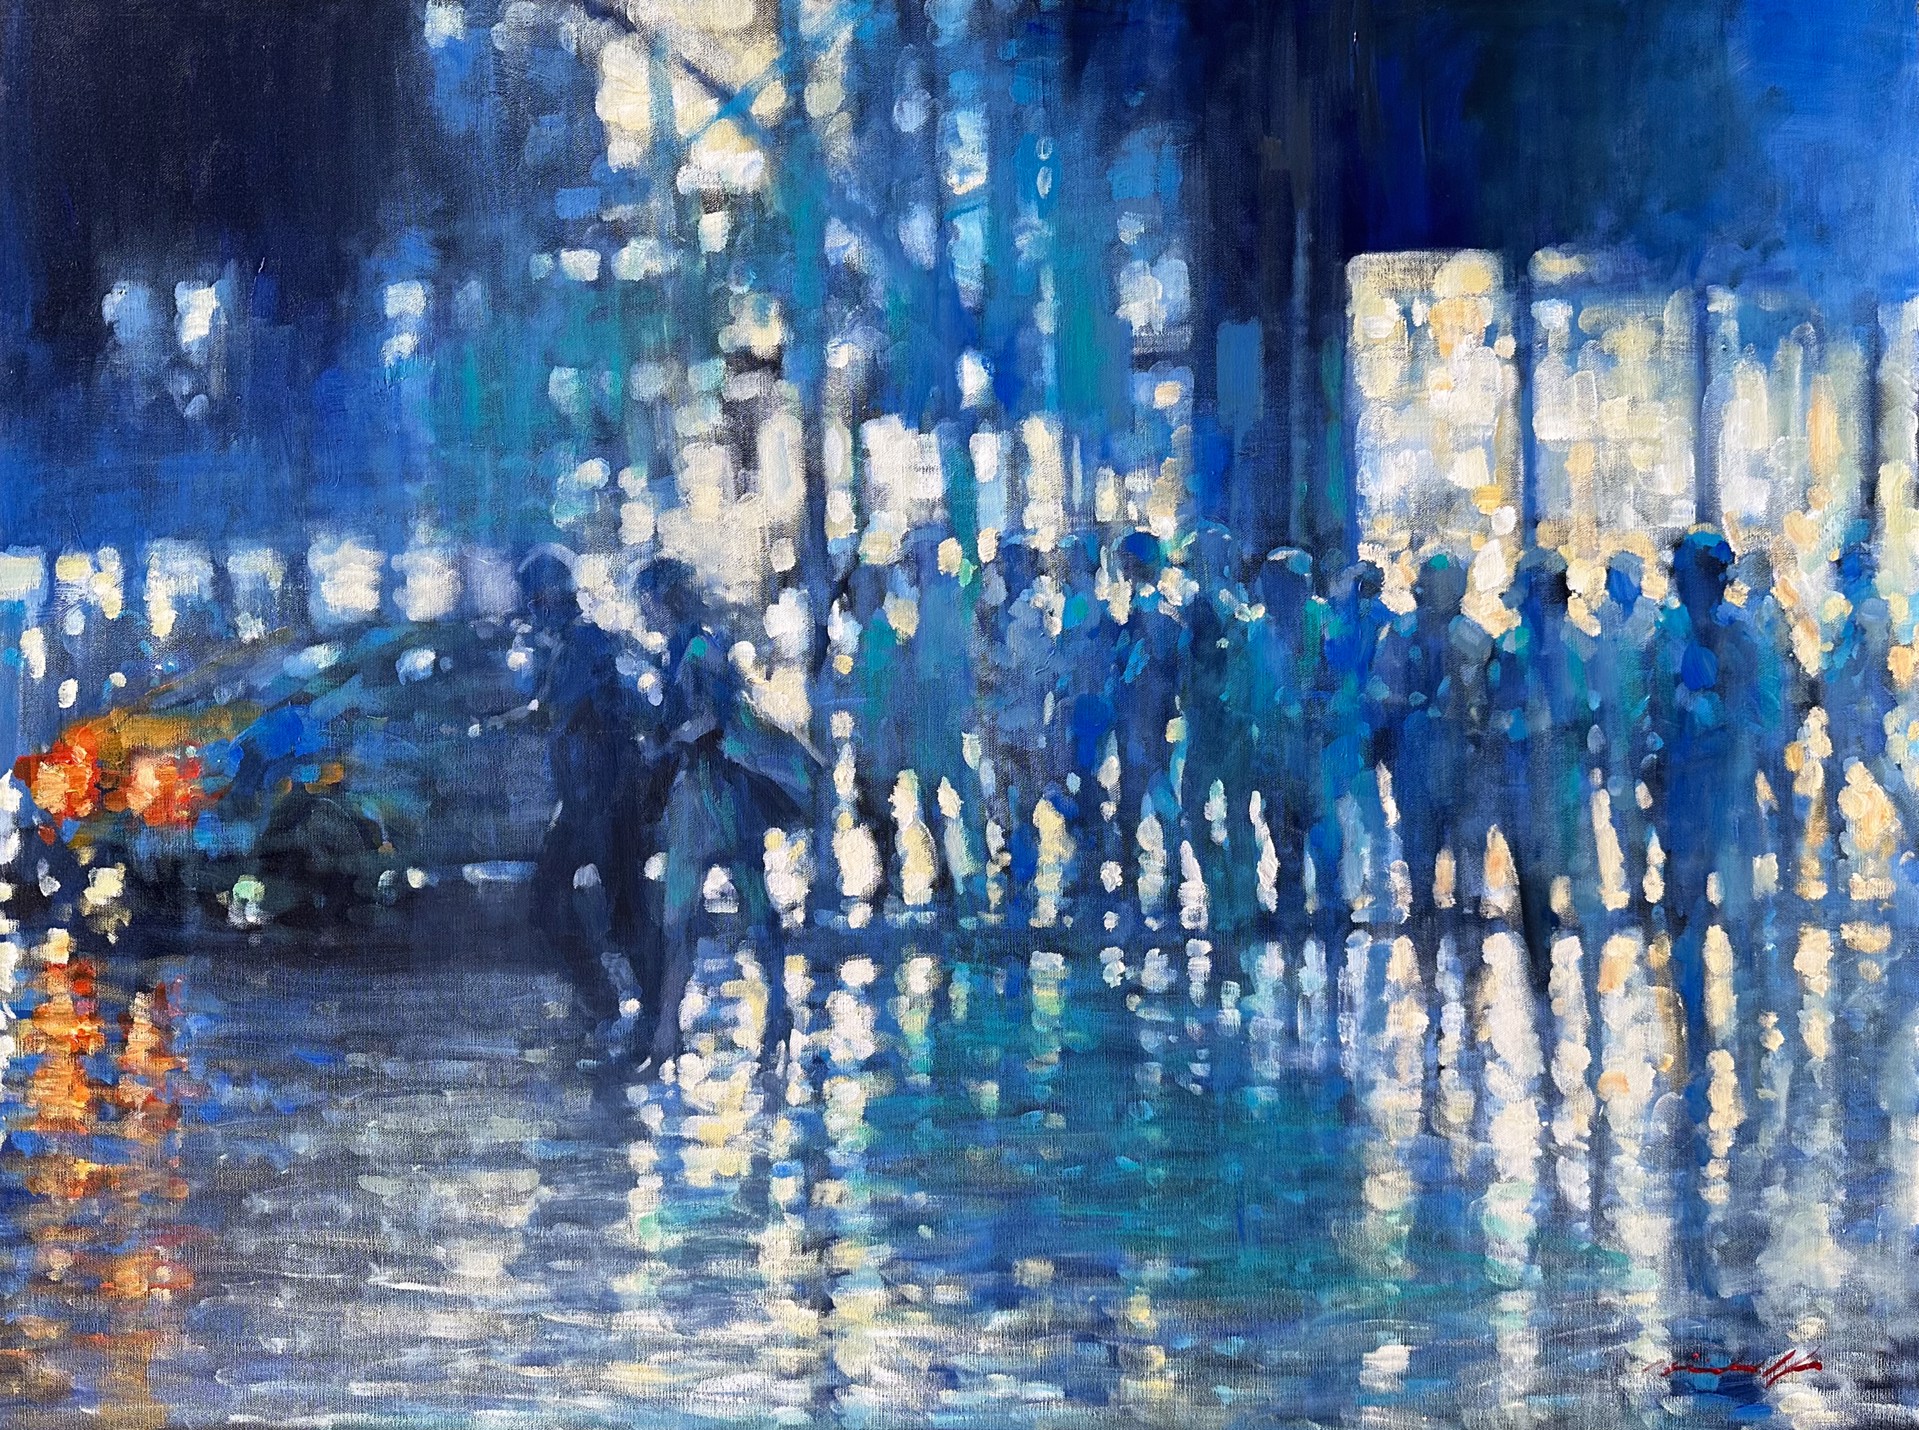 Night Out by David Hinchliffe